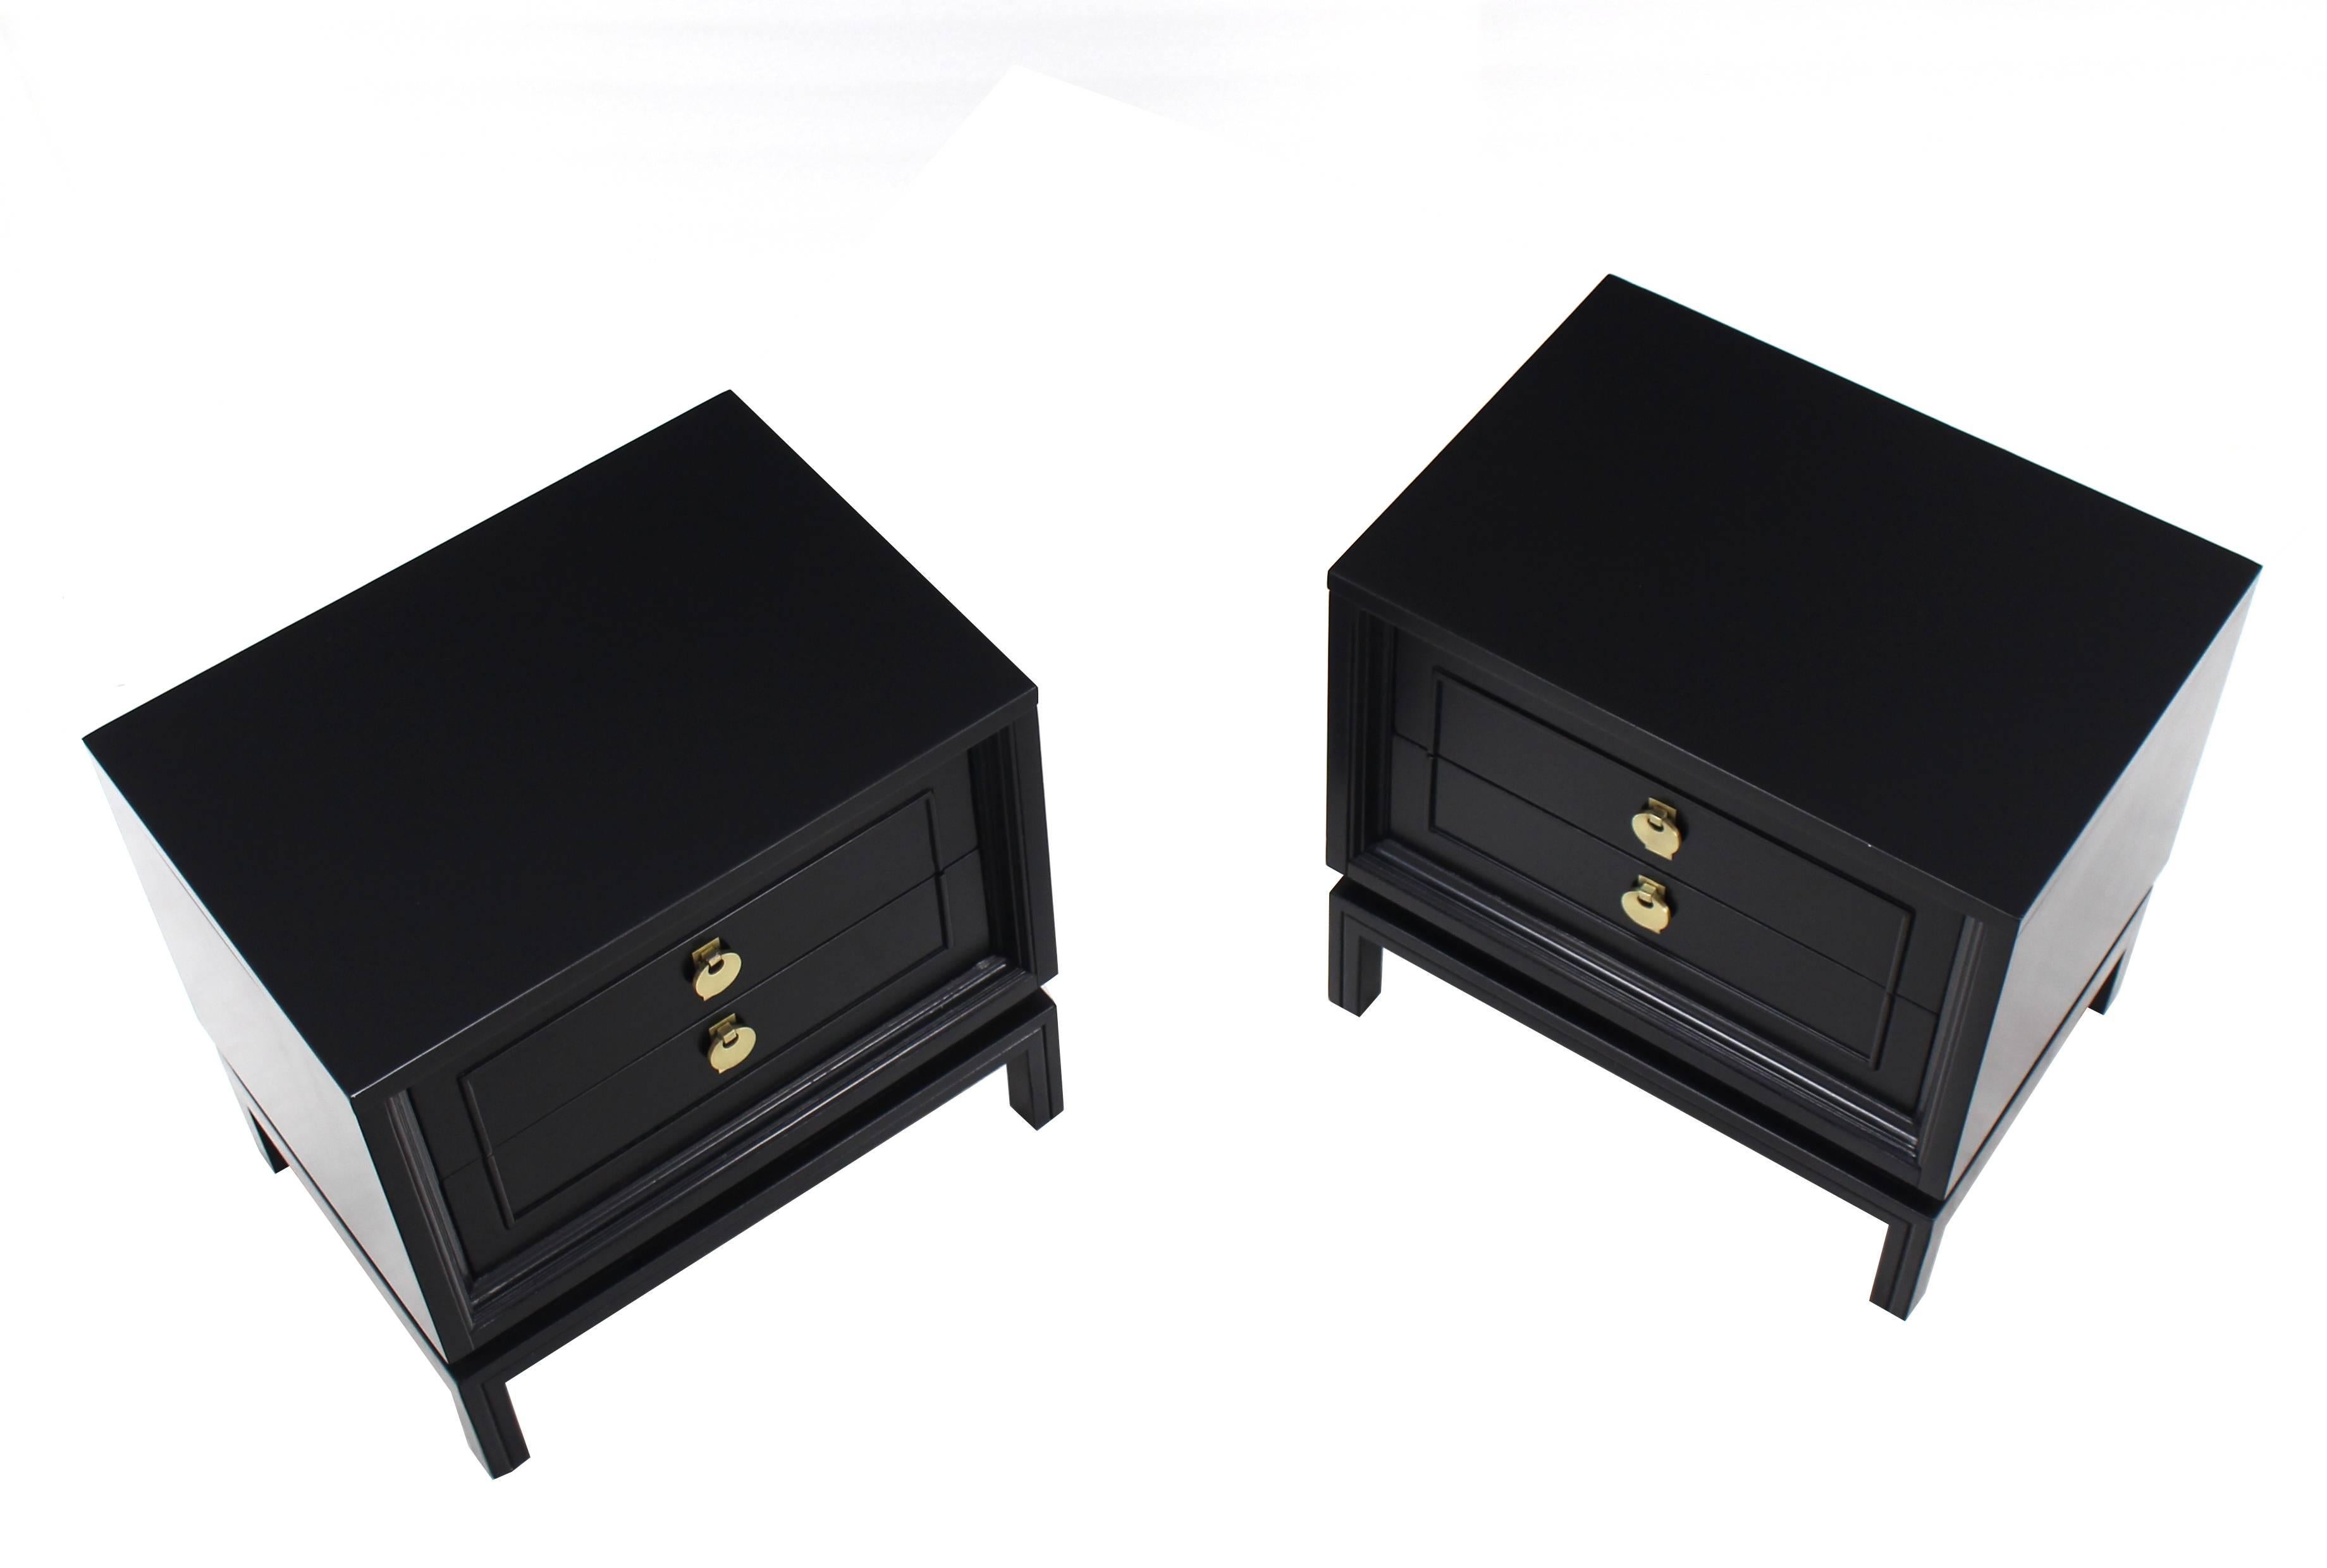 American Pair of Mid Century Modern Ebonized Black Lacquer End Tables Nightstands